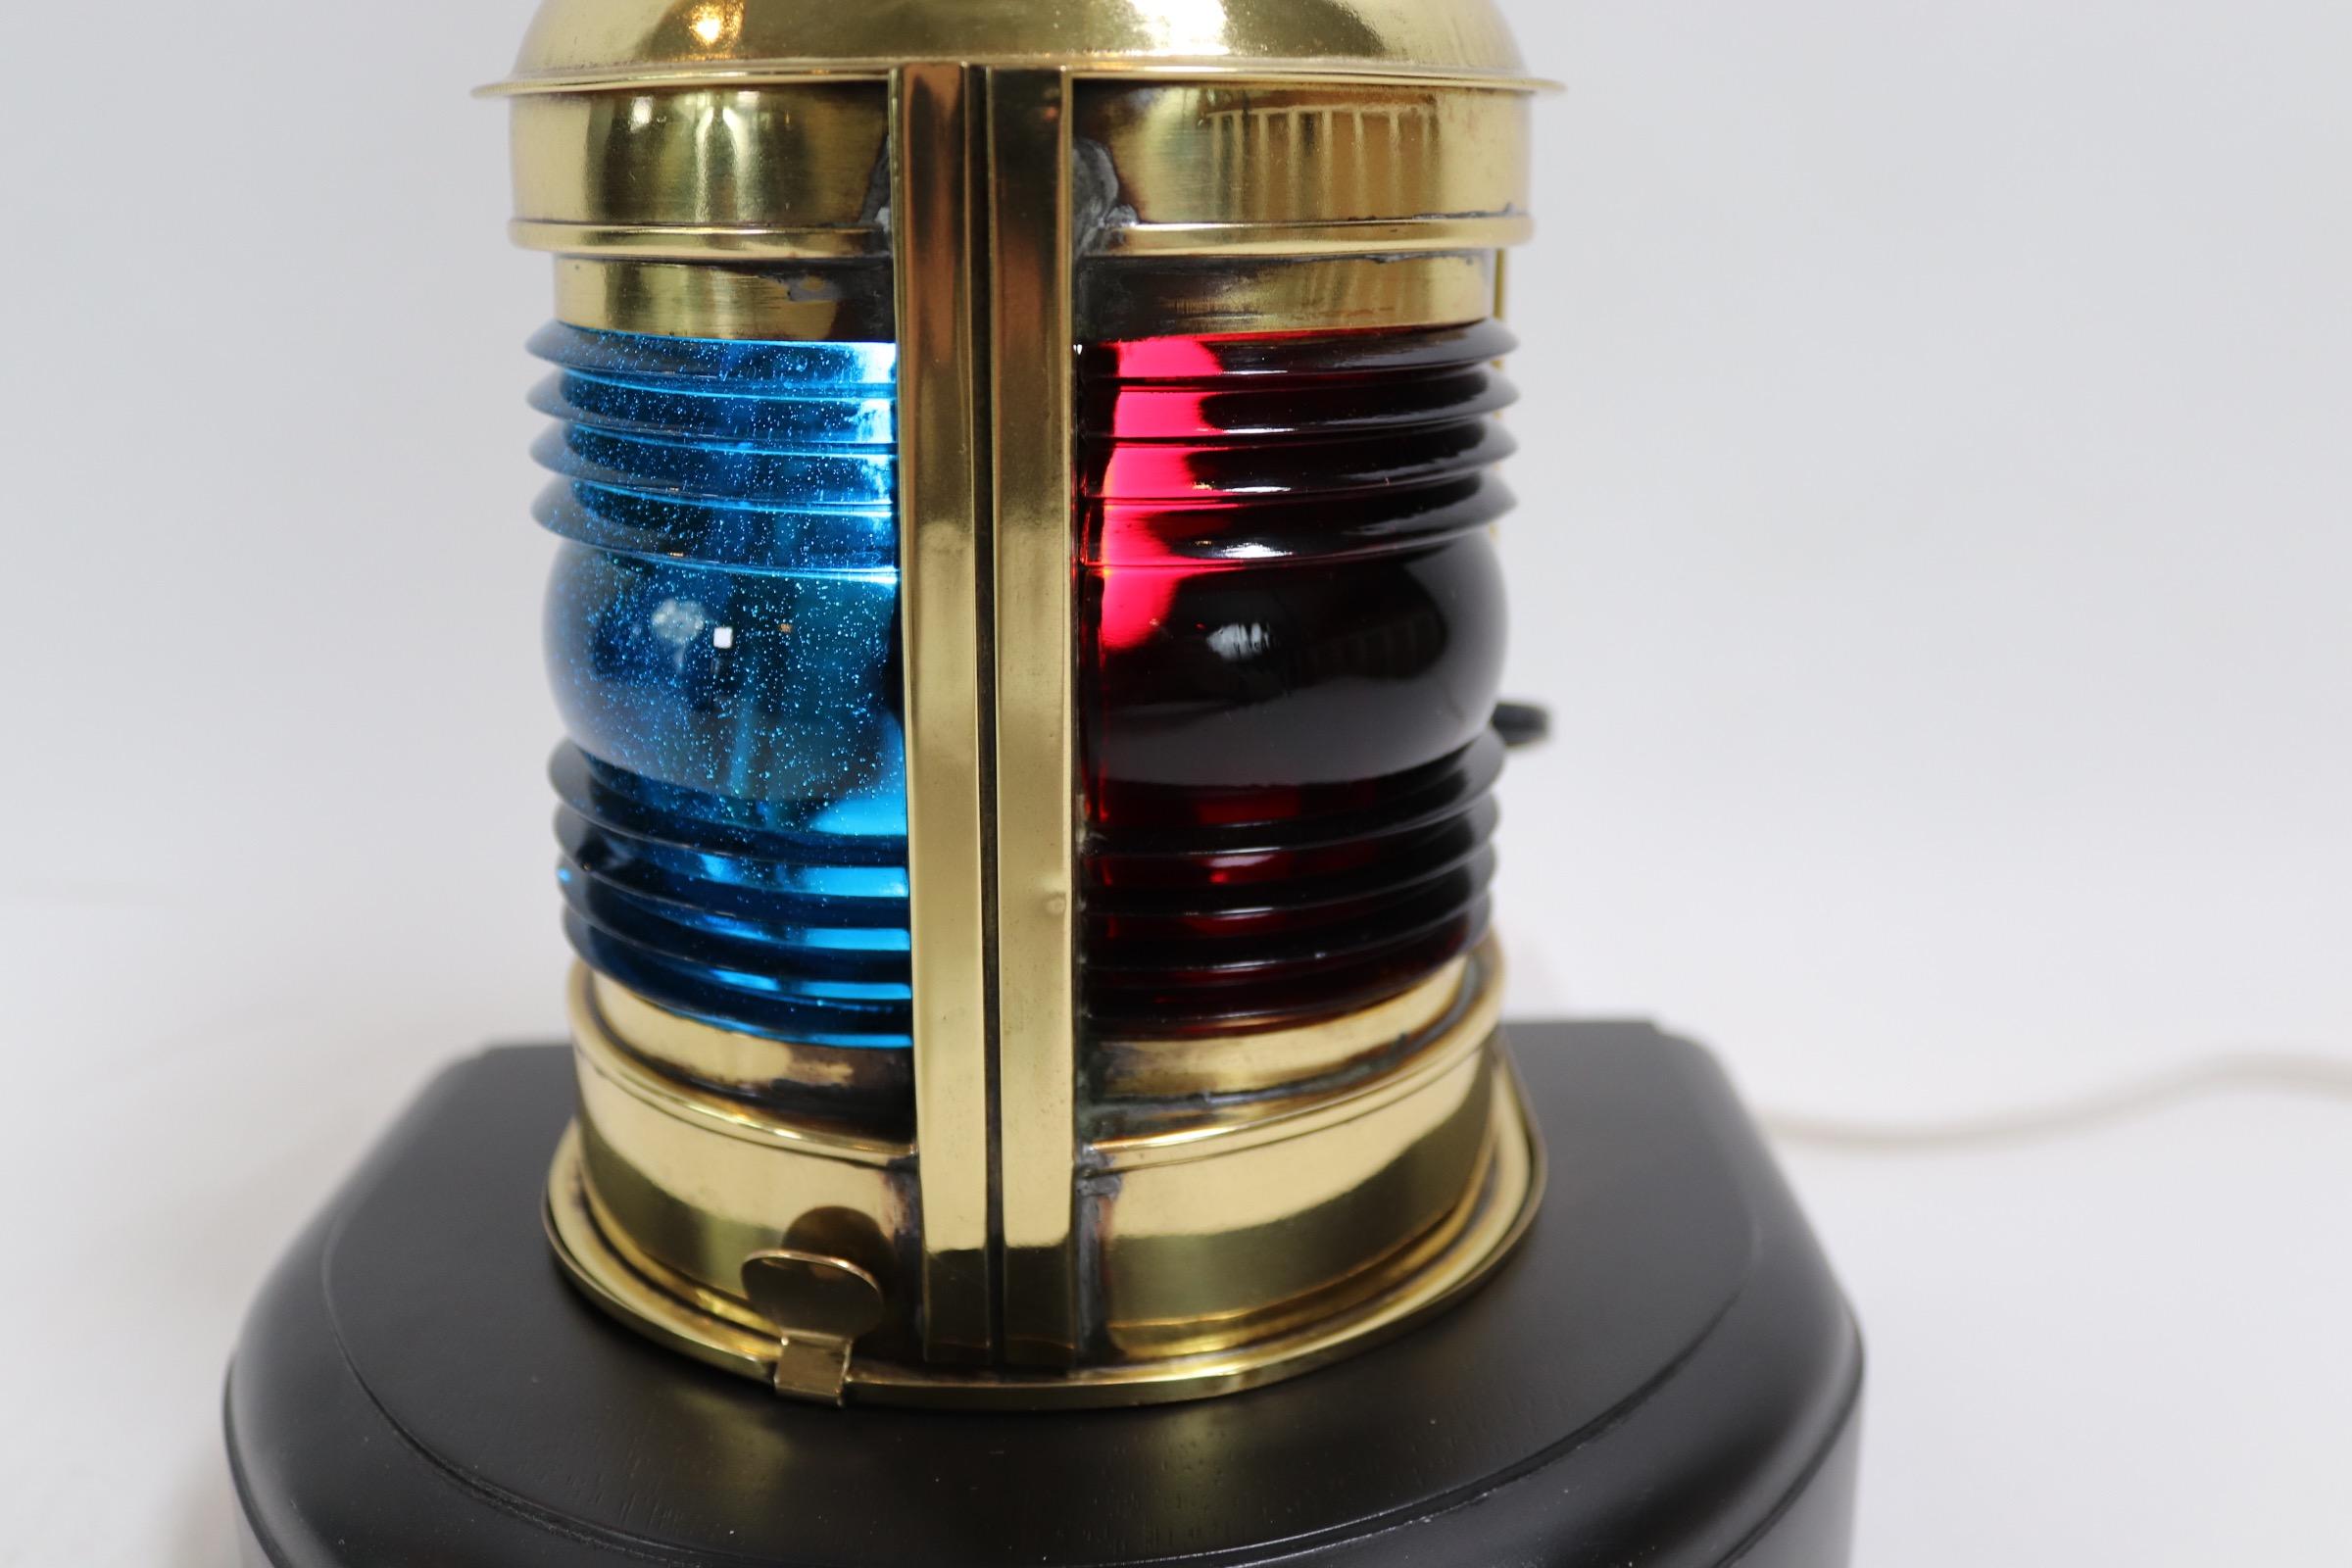 Highly polished and lacquered nautical boat lantern with red and blue Fresnel lenses. Mounted to a thick wood base with dark finish. Lantern has been wired for home use. Weight is 3 pounds.